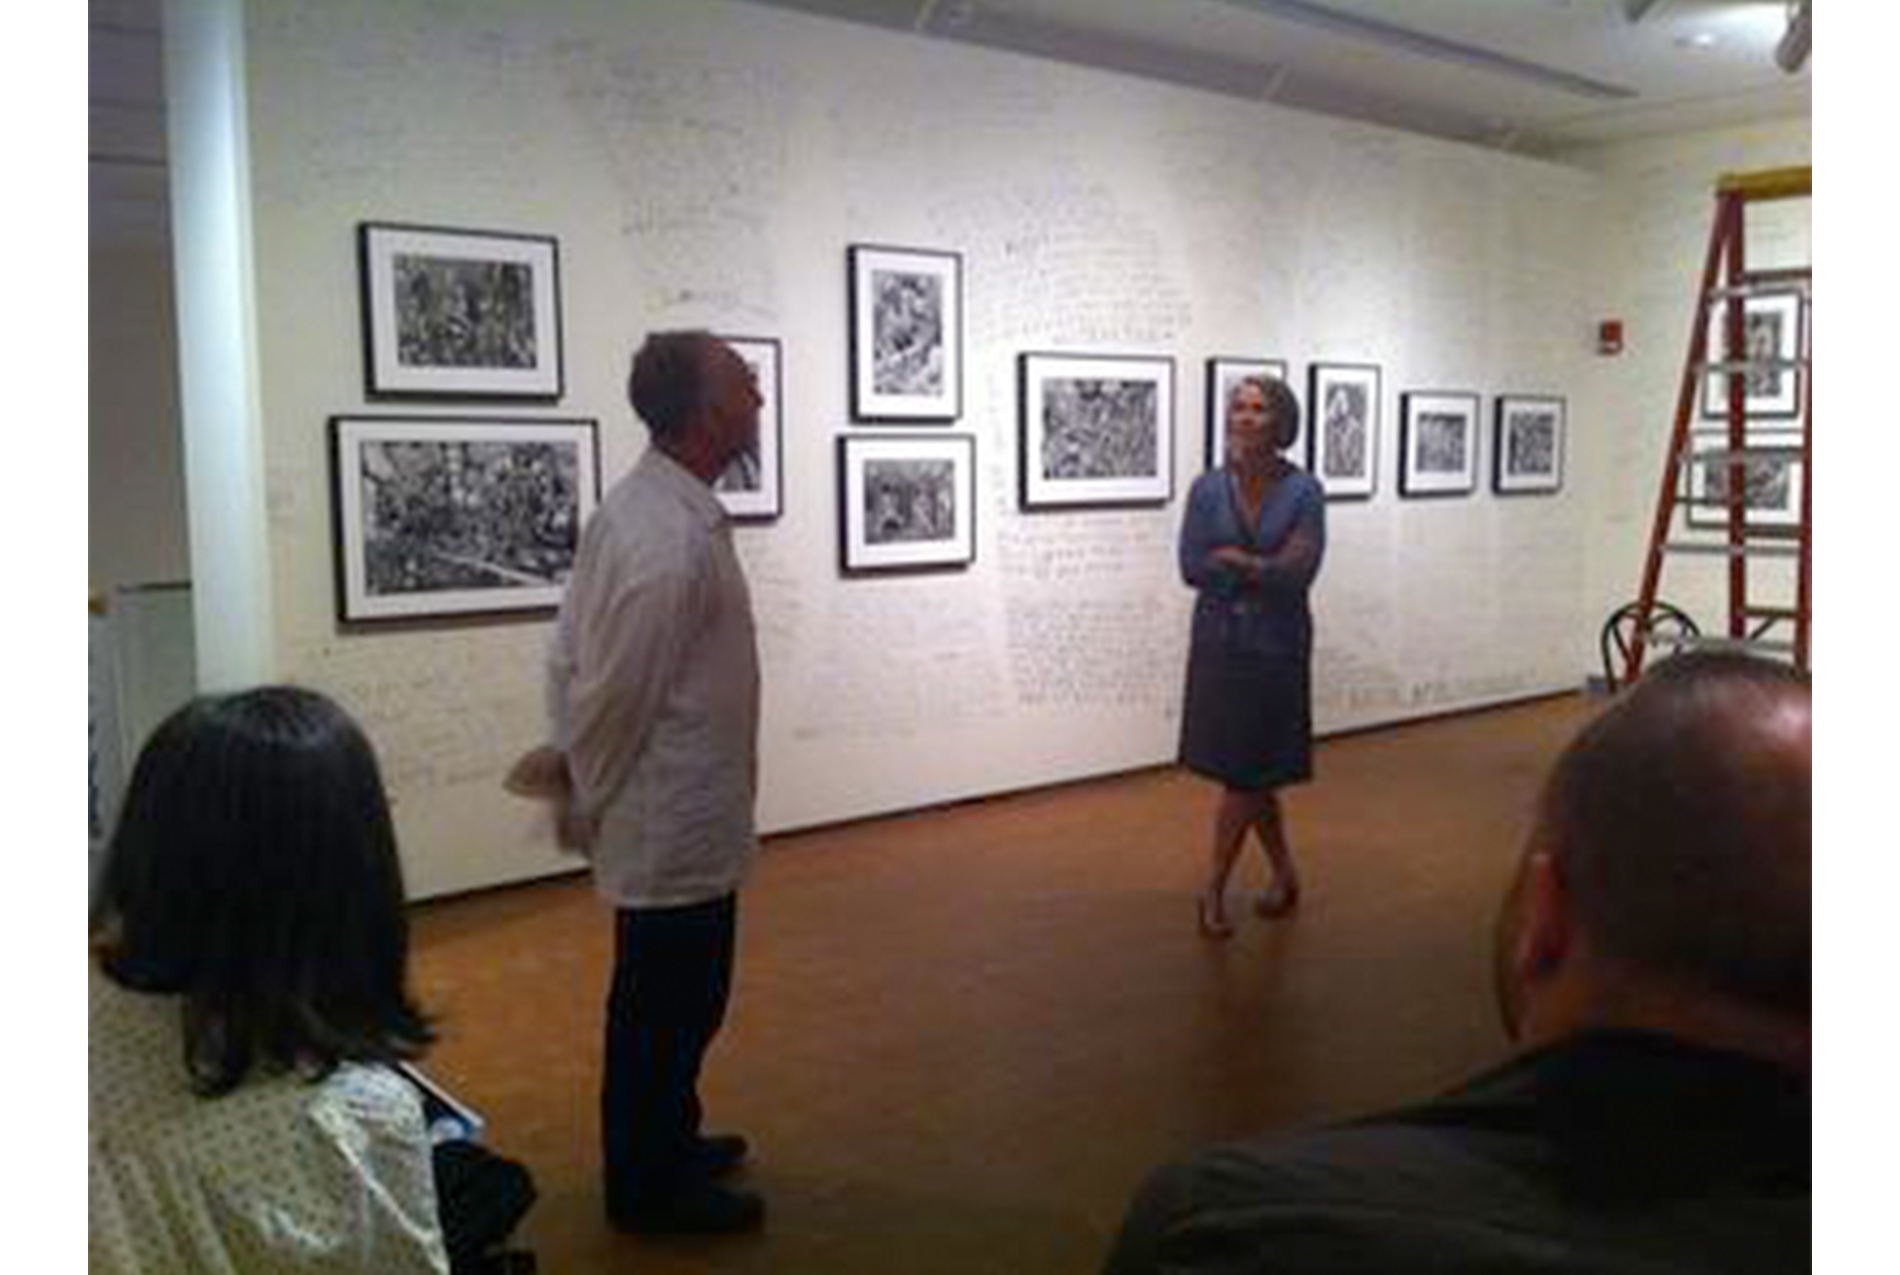 art gallery with prints all along the walls; man and woman stand in front of an audience